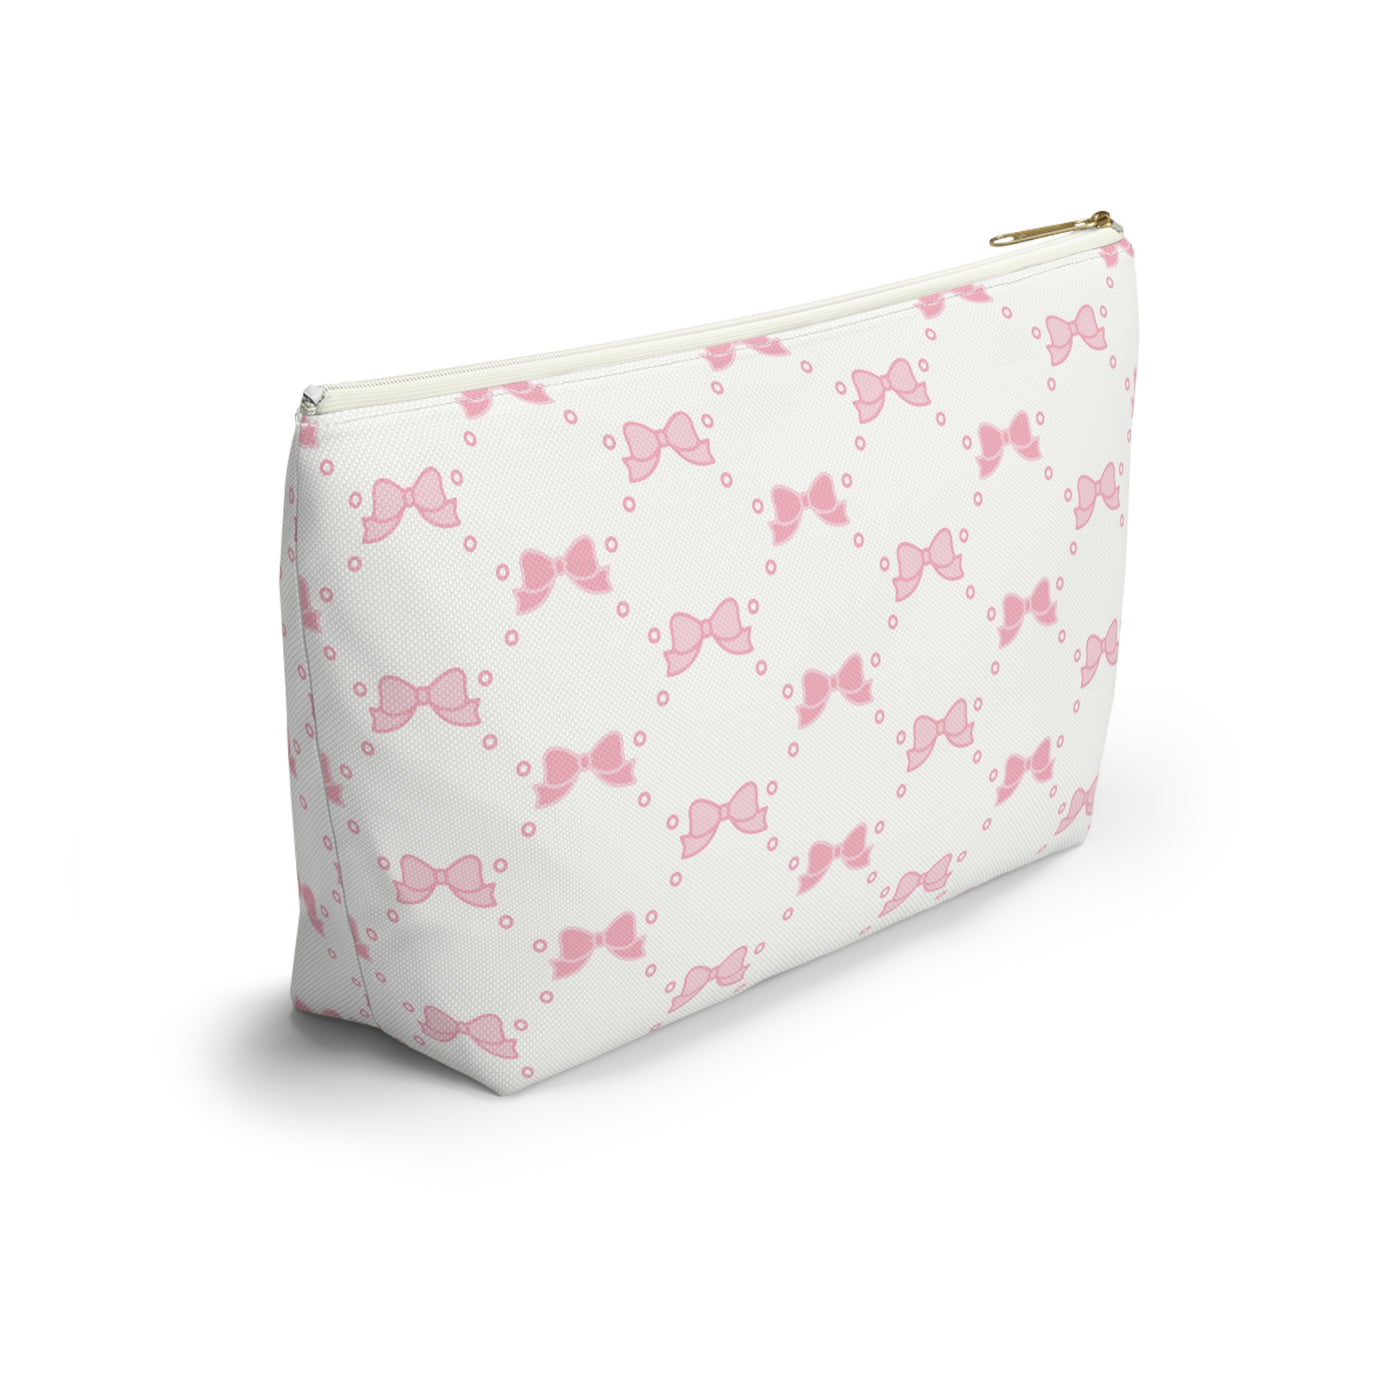 Pink Bow Makeup Bag - Graduation Gift, Bed Party Gift, Acceptance Gift, College Gift, Bow Aesthetic, Pink Bow, Coquette Aesthetic, Coquette